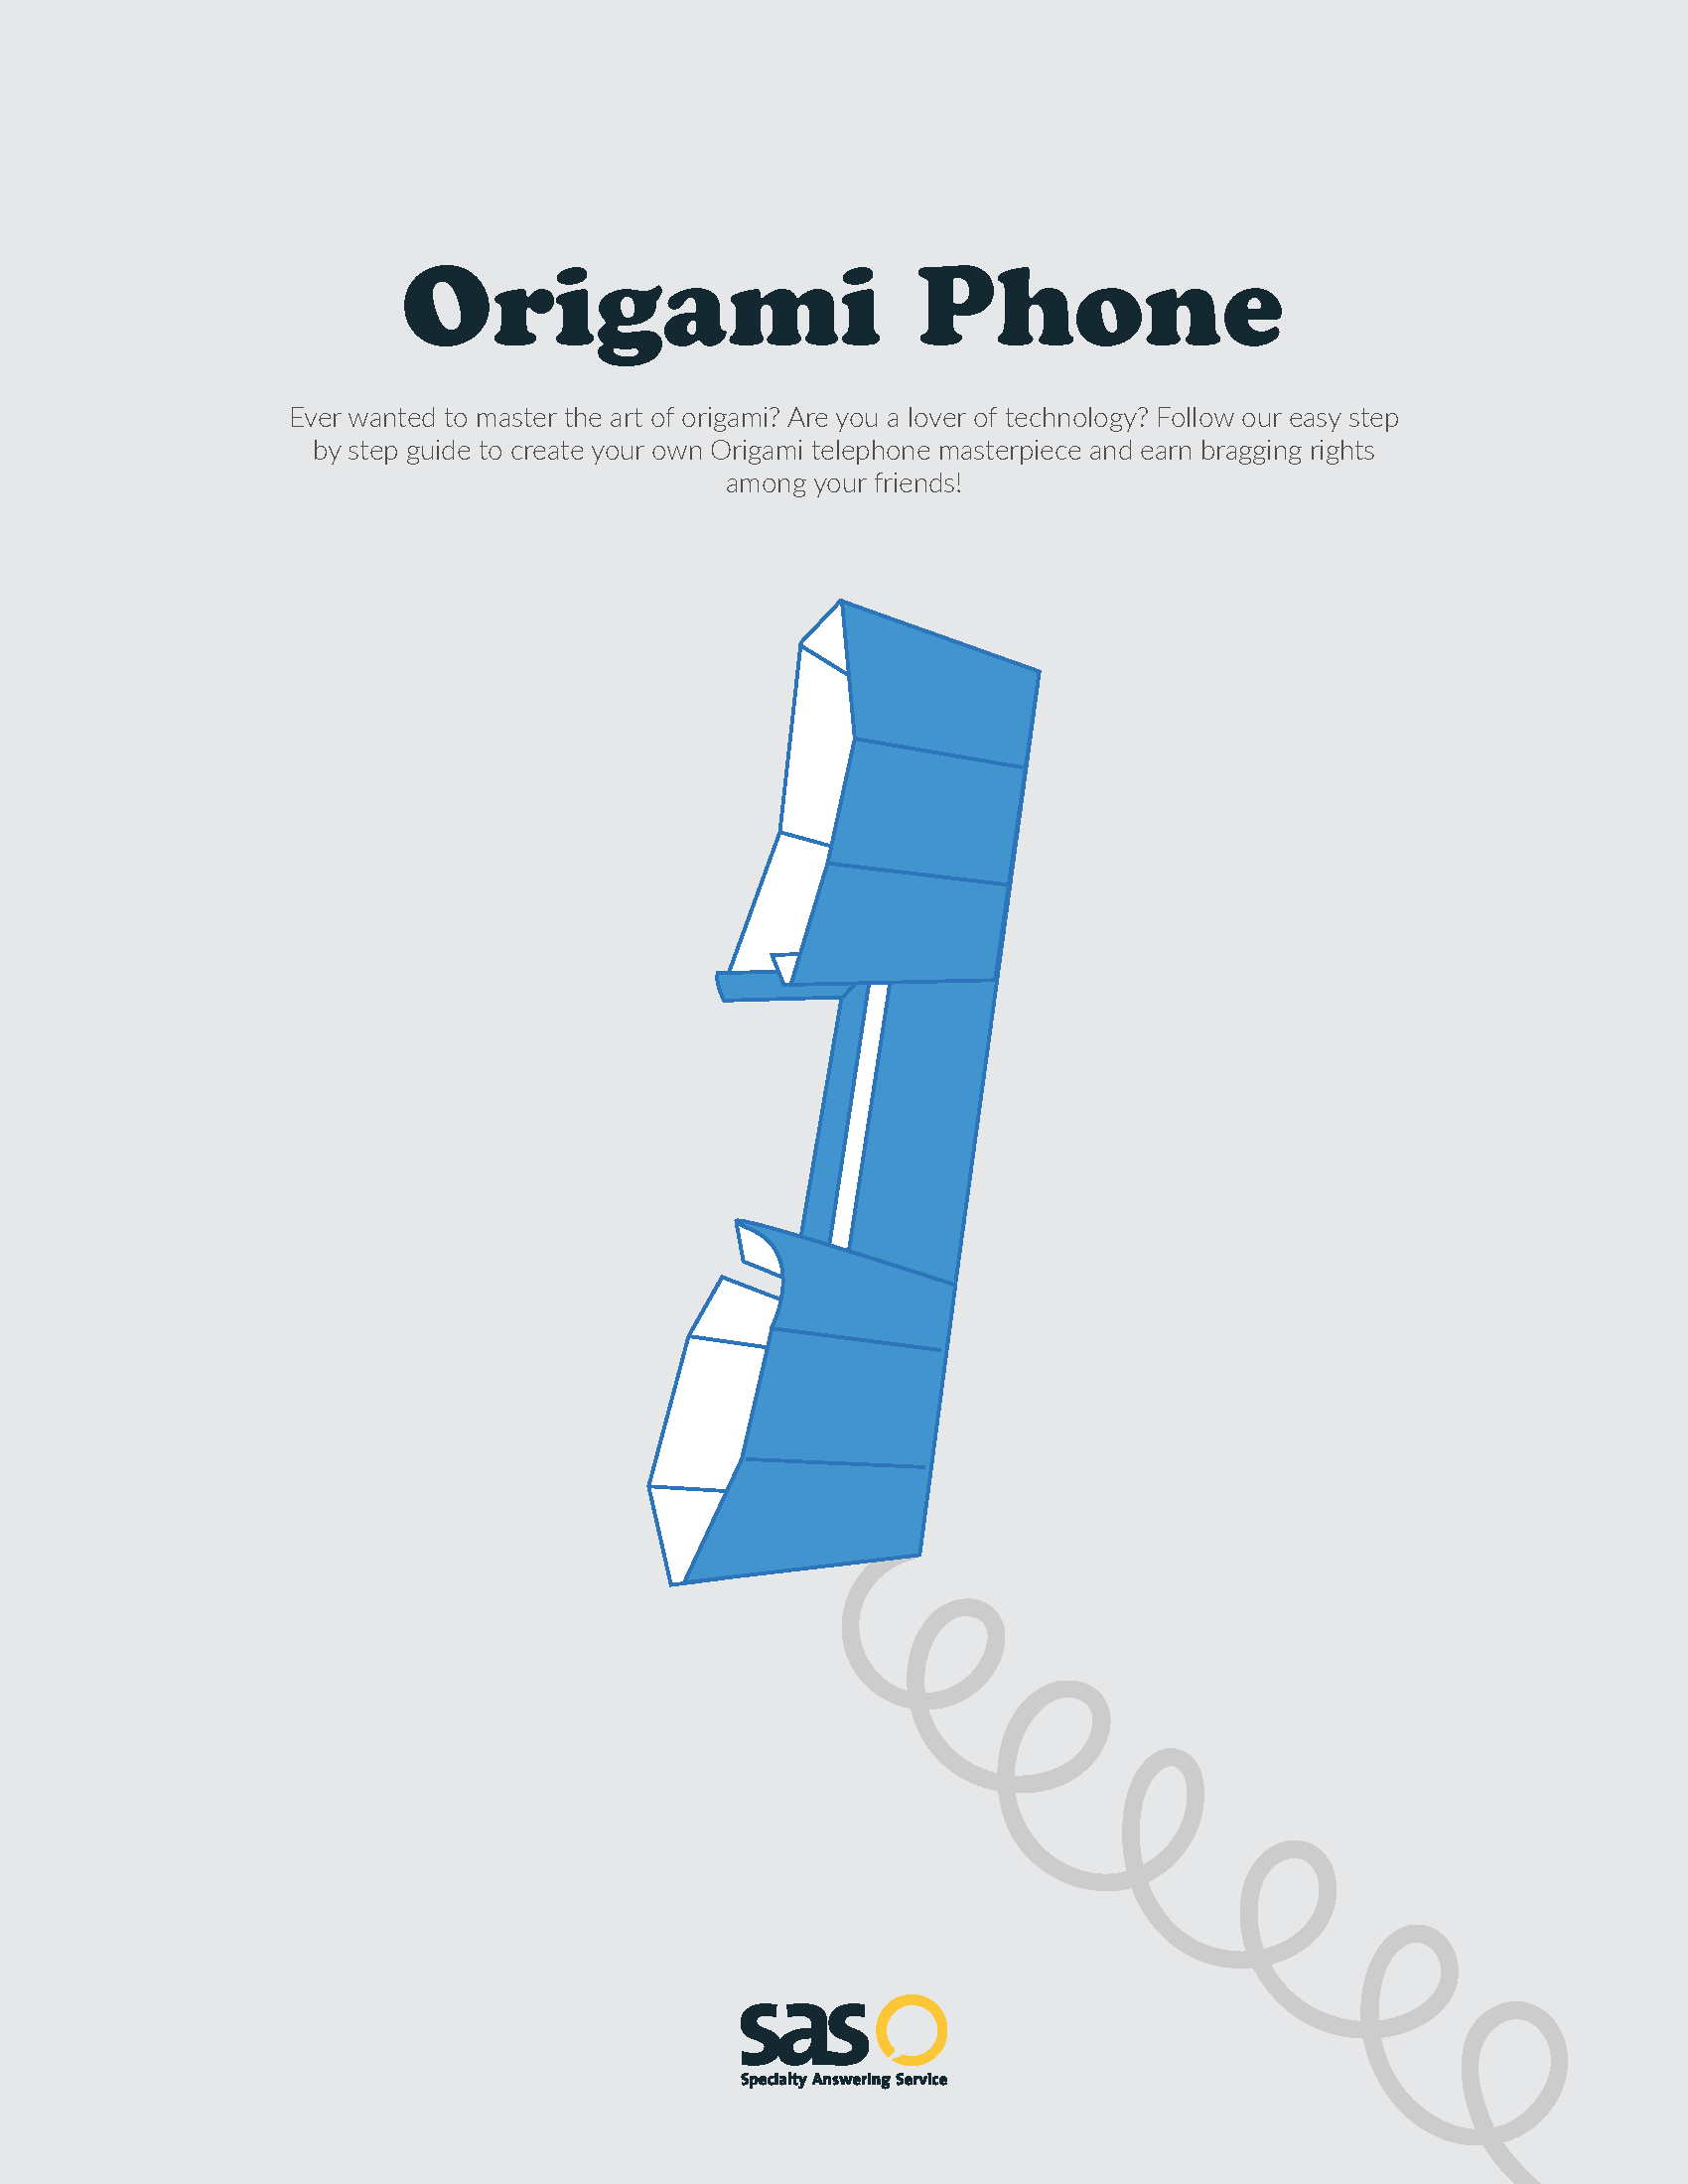 How To Make an Origami Telephone - Instructions Page 1